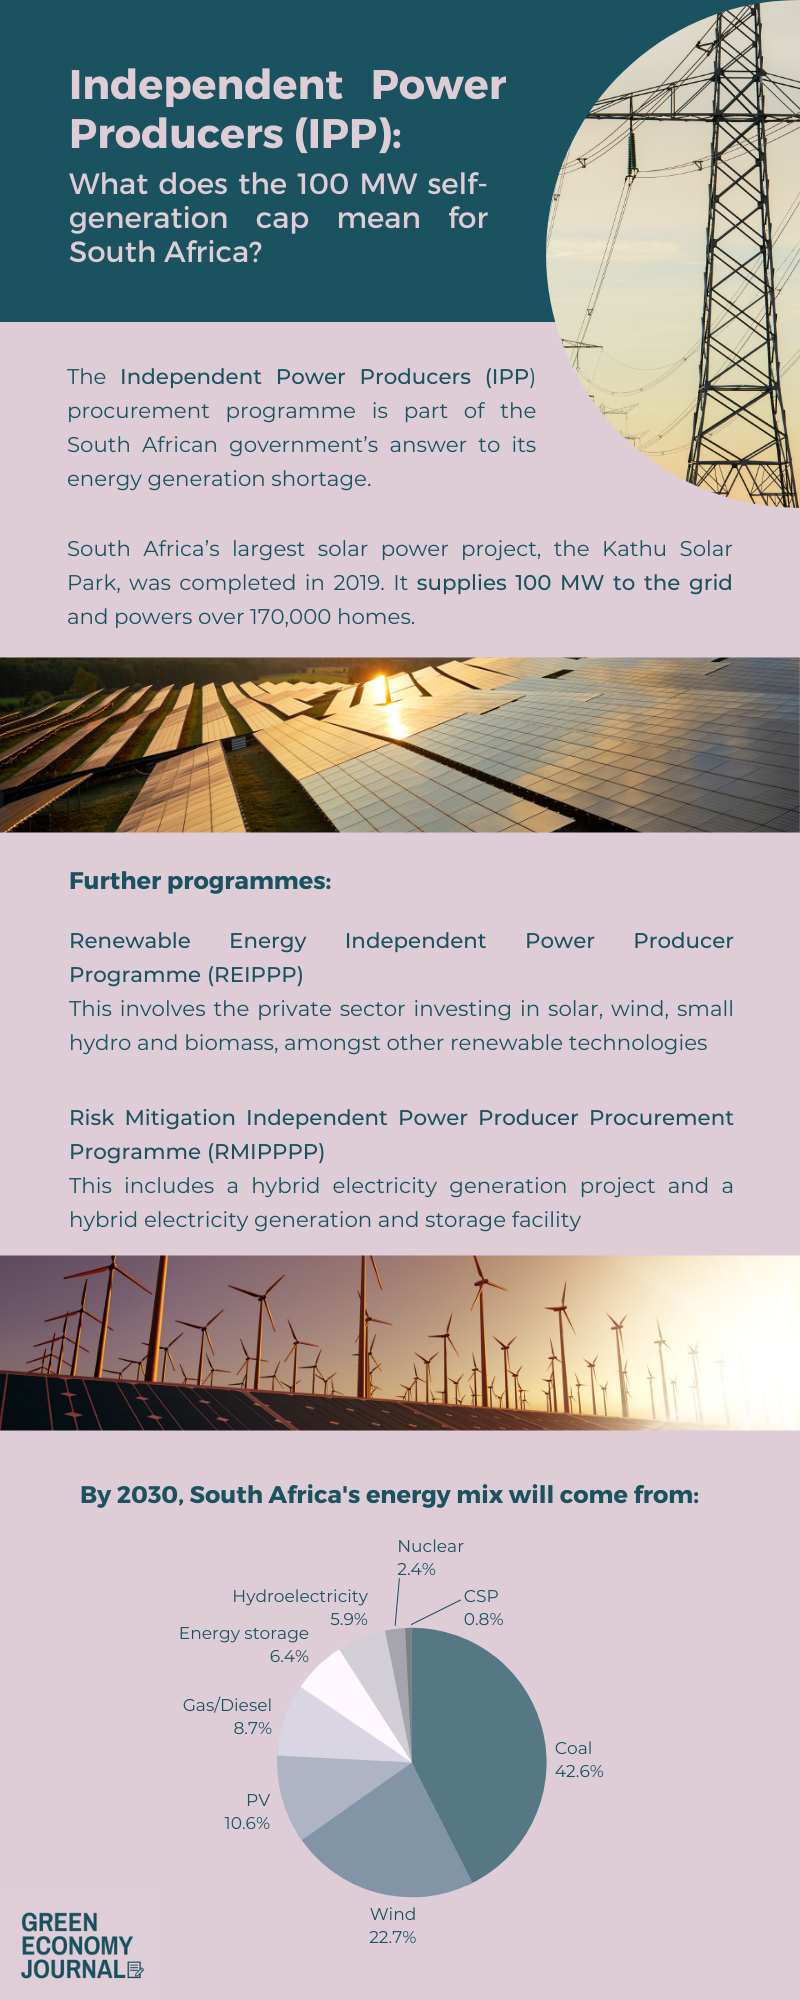 infographic on Independent Power Producers (IPP): What does the 100 MW self-generation cap mean for South Africa